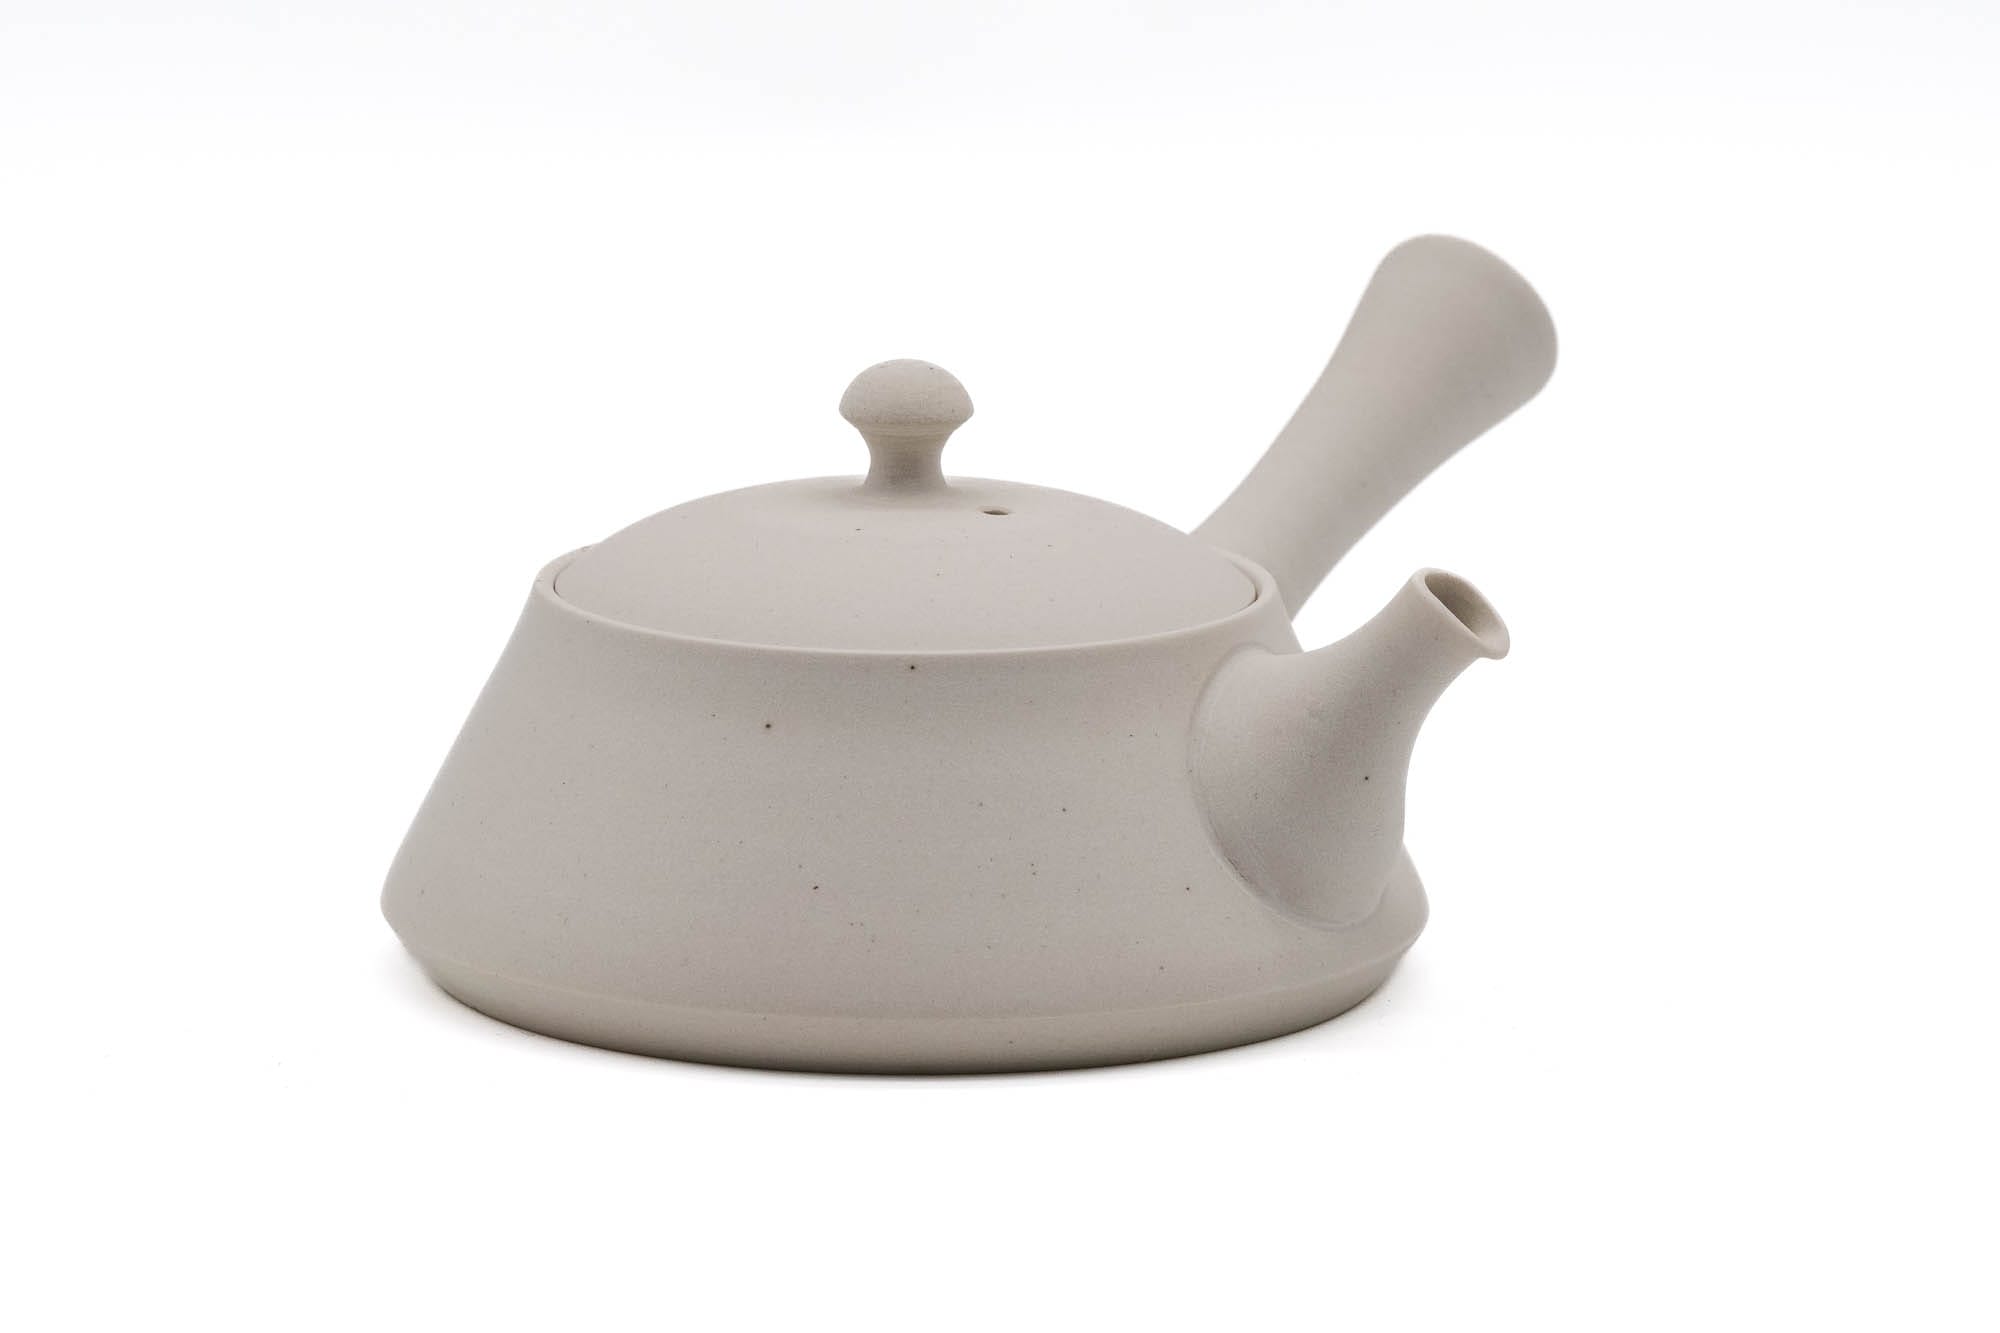 How to Choose Your First Japanese Teapot (Kyusu) – Tezumi